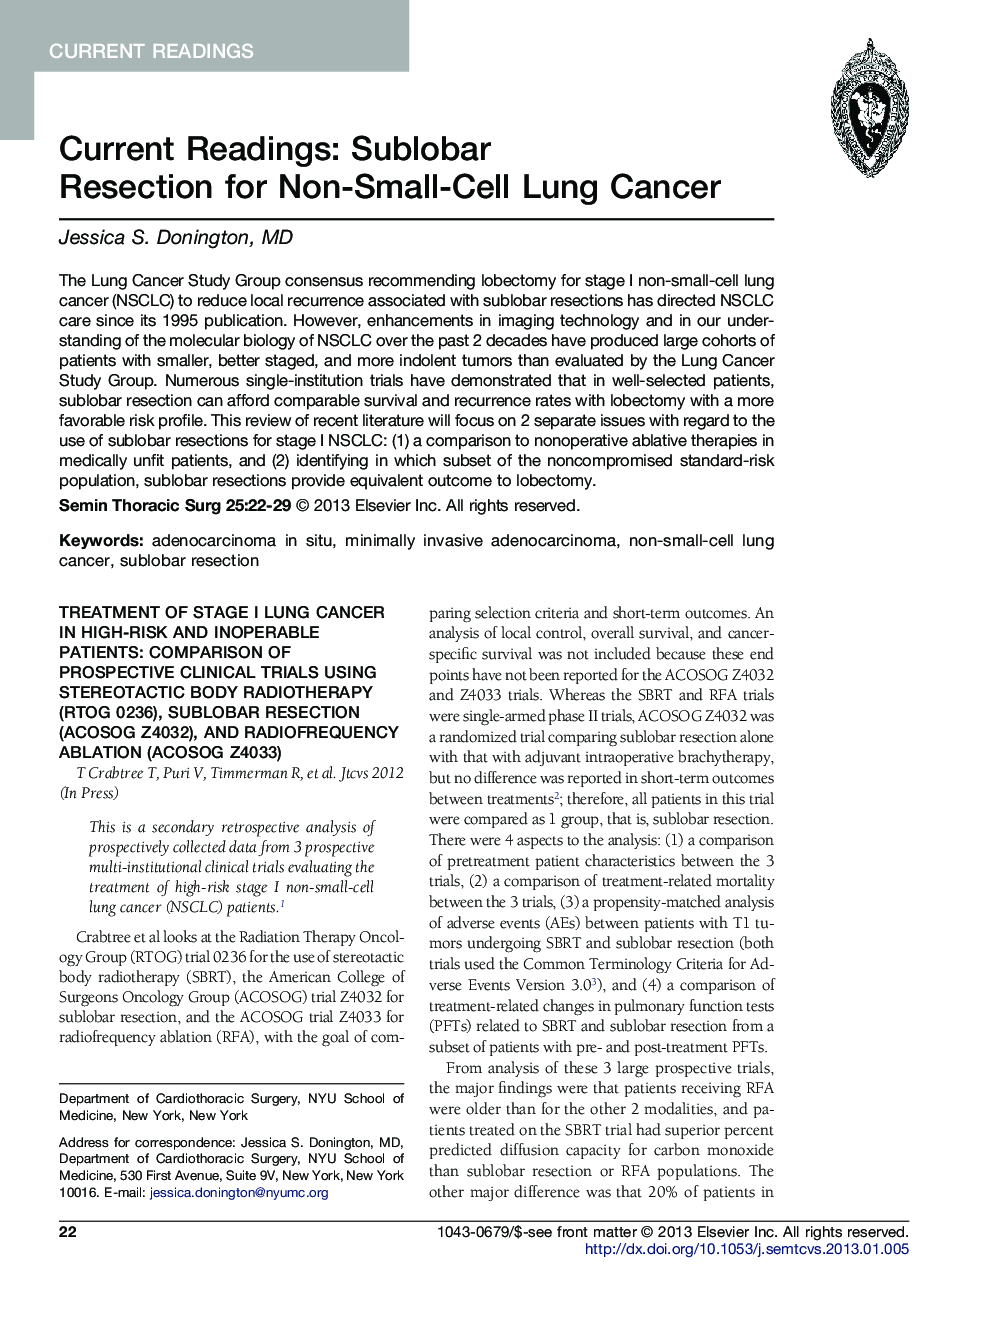 Current Readings: Sublobar Resection for Non-Small-Cell Lung Cancer